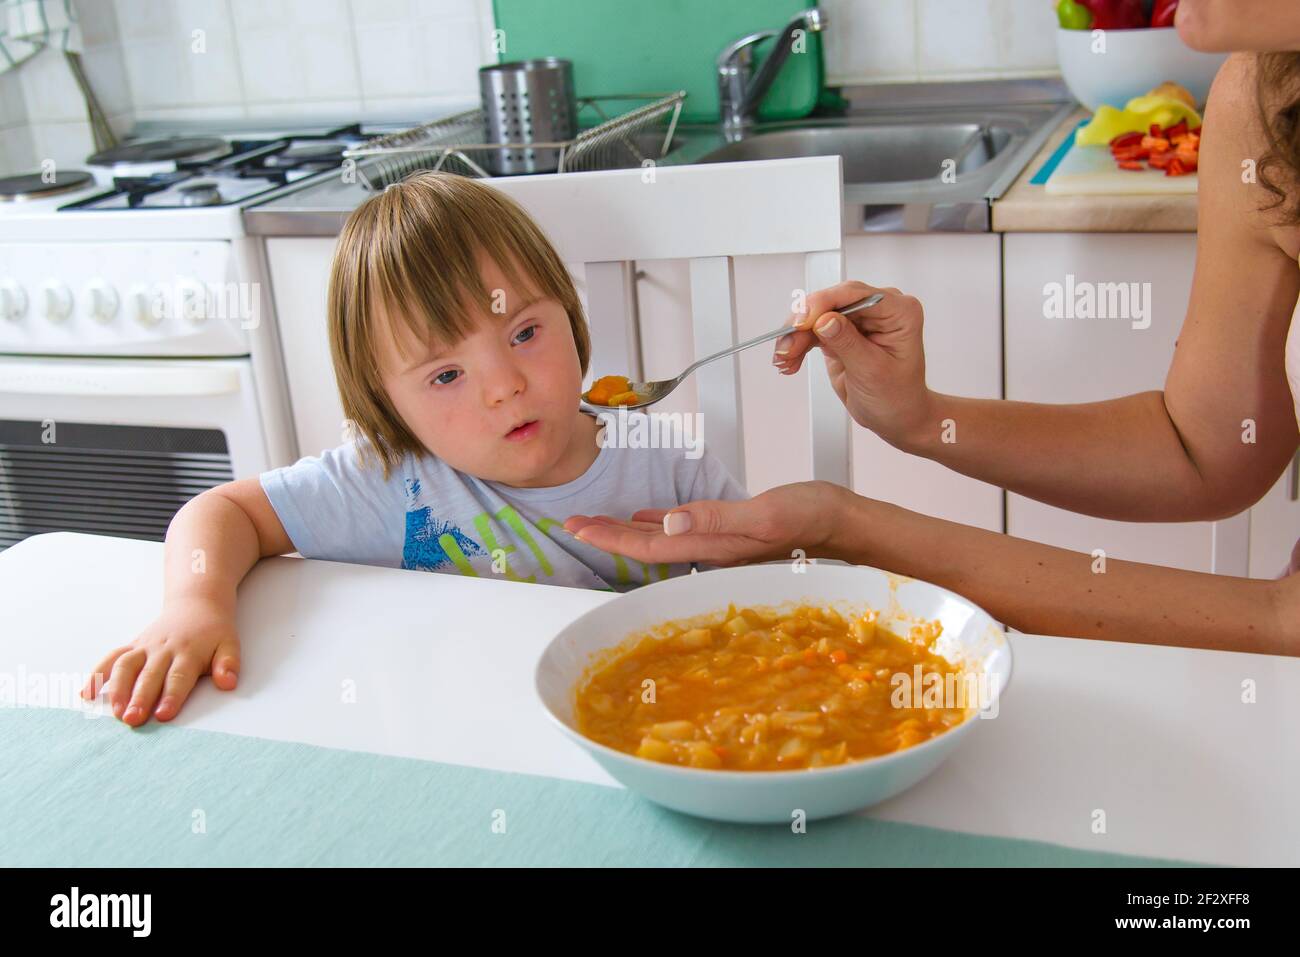 Boy with down syndrome refuses healthy food given by his mother. Stock Photo